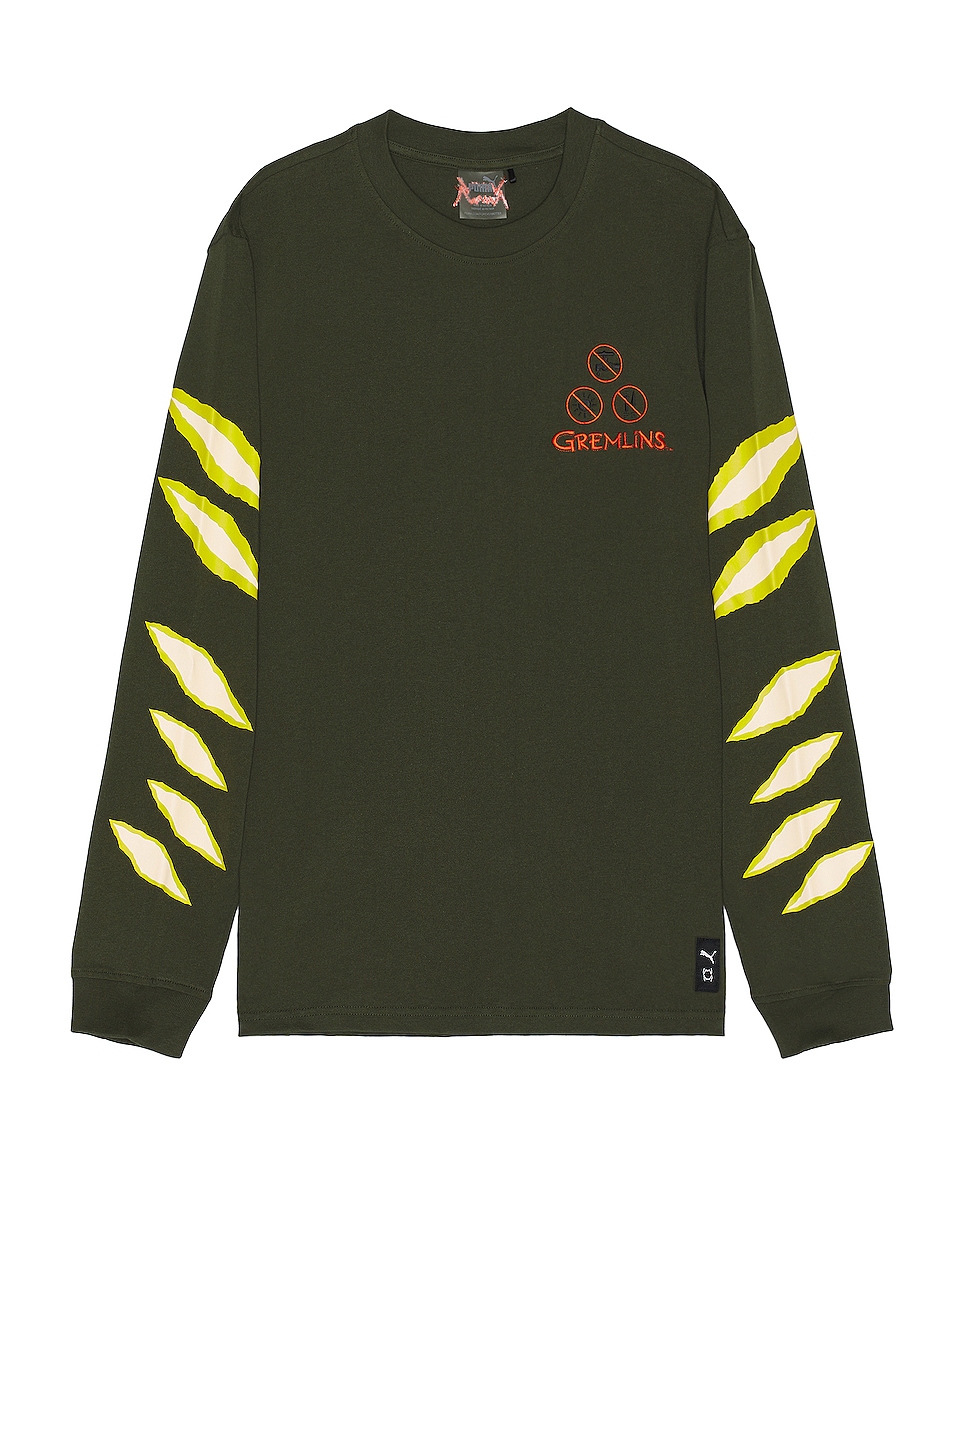 Image 1 of Puma Select Gremlins Long Sleeve Tee in GREEN